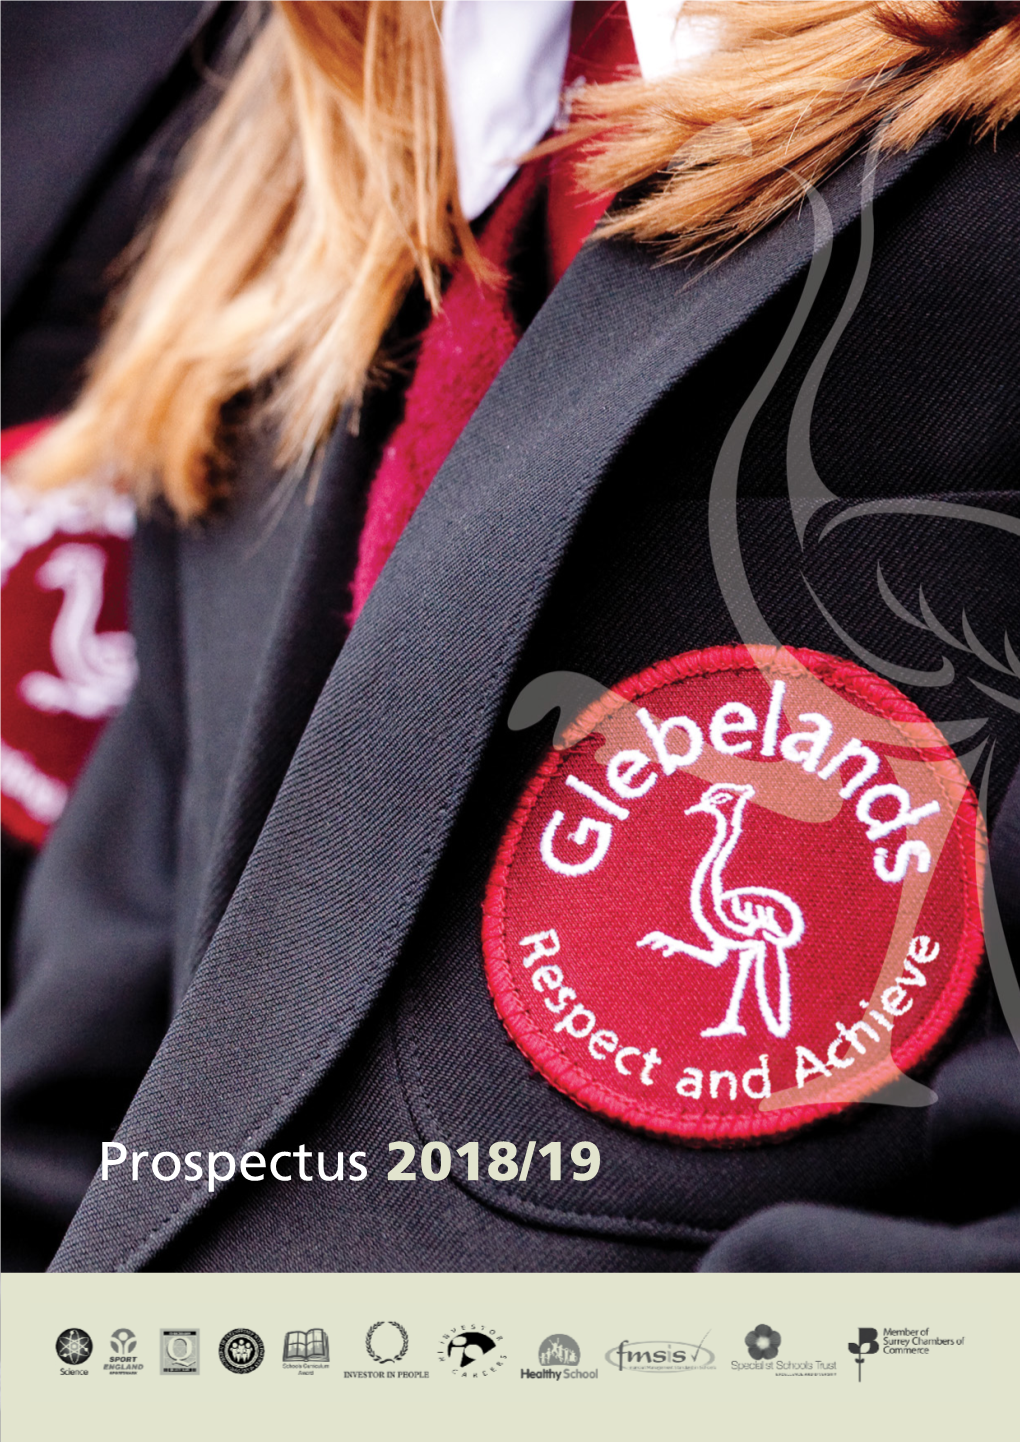 Prospectus 2018/19 at Glebelands We Constantly Strive to Achieve Our Personal Best: - in Learning - in Enrichment Activities - As Part of a Community